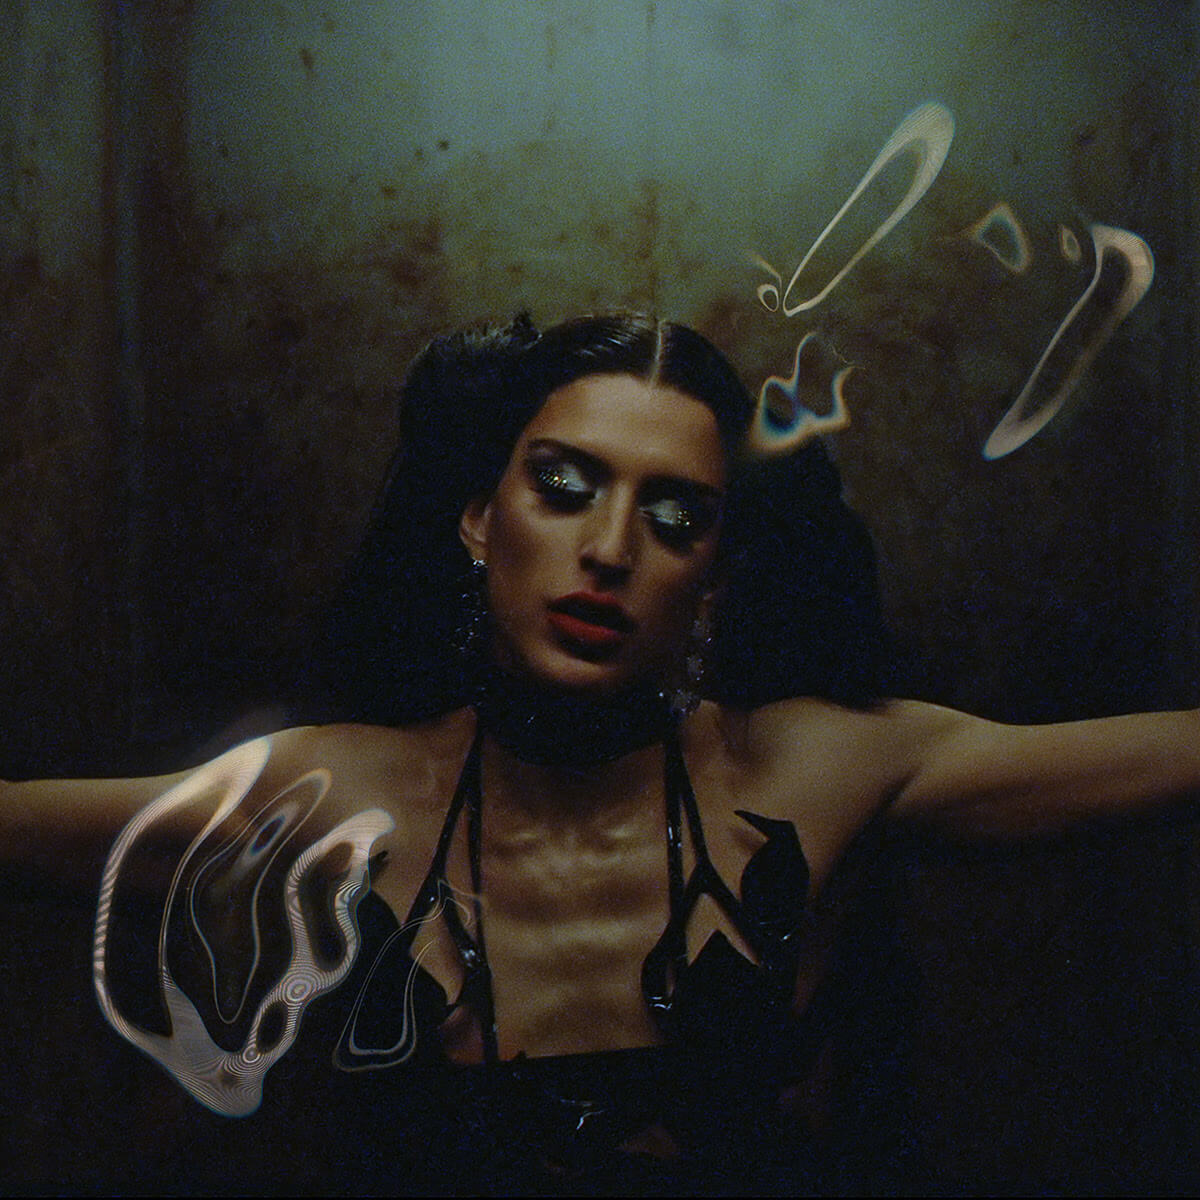 Arca has released a video for “Ritual,” a track off the Kick compilation. Directed by Albert Moya, who directed Arca’s Cayó video, “Ritual.”